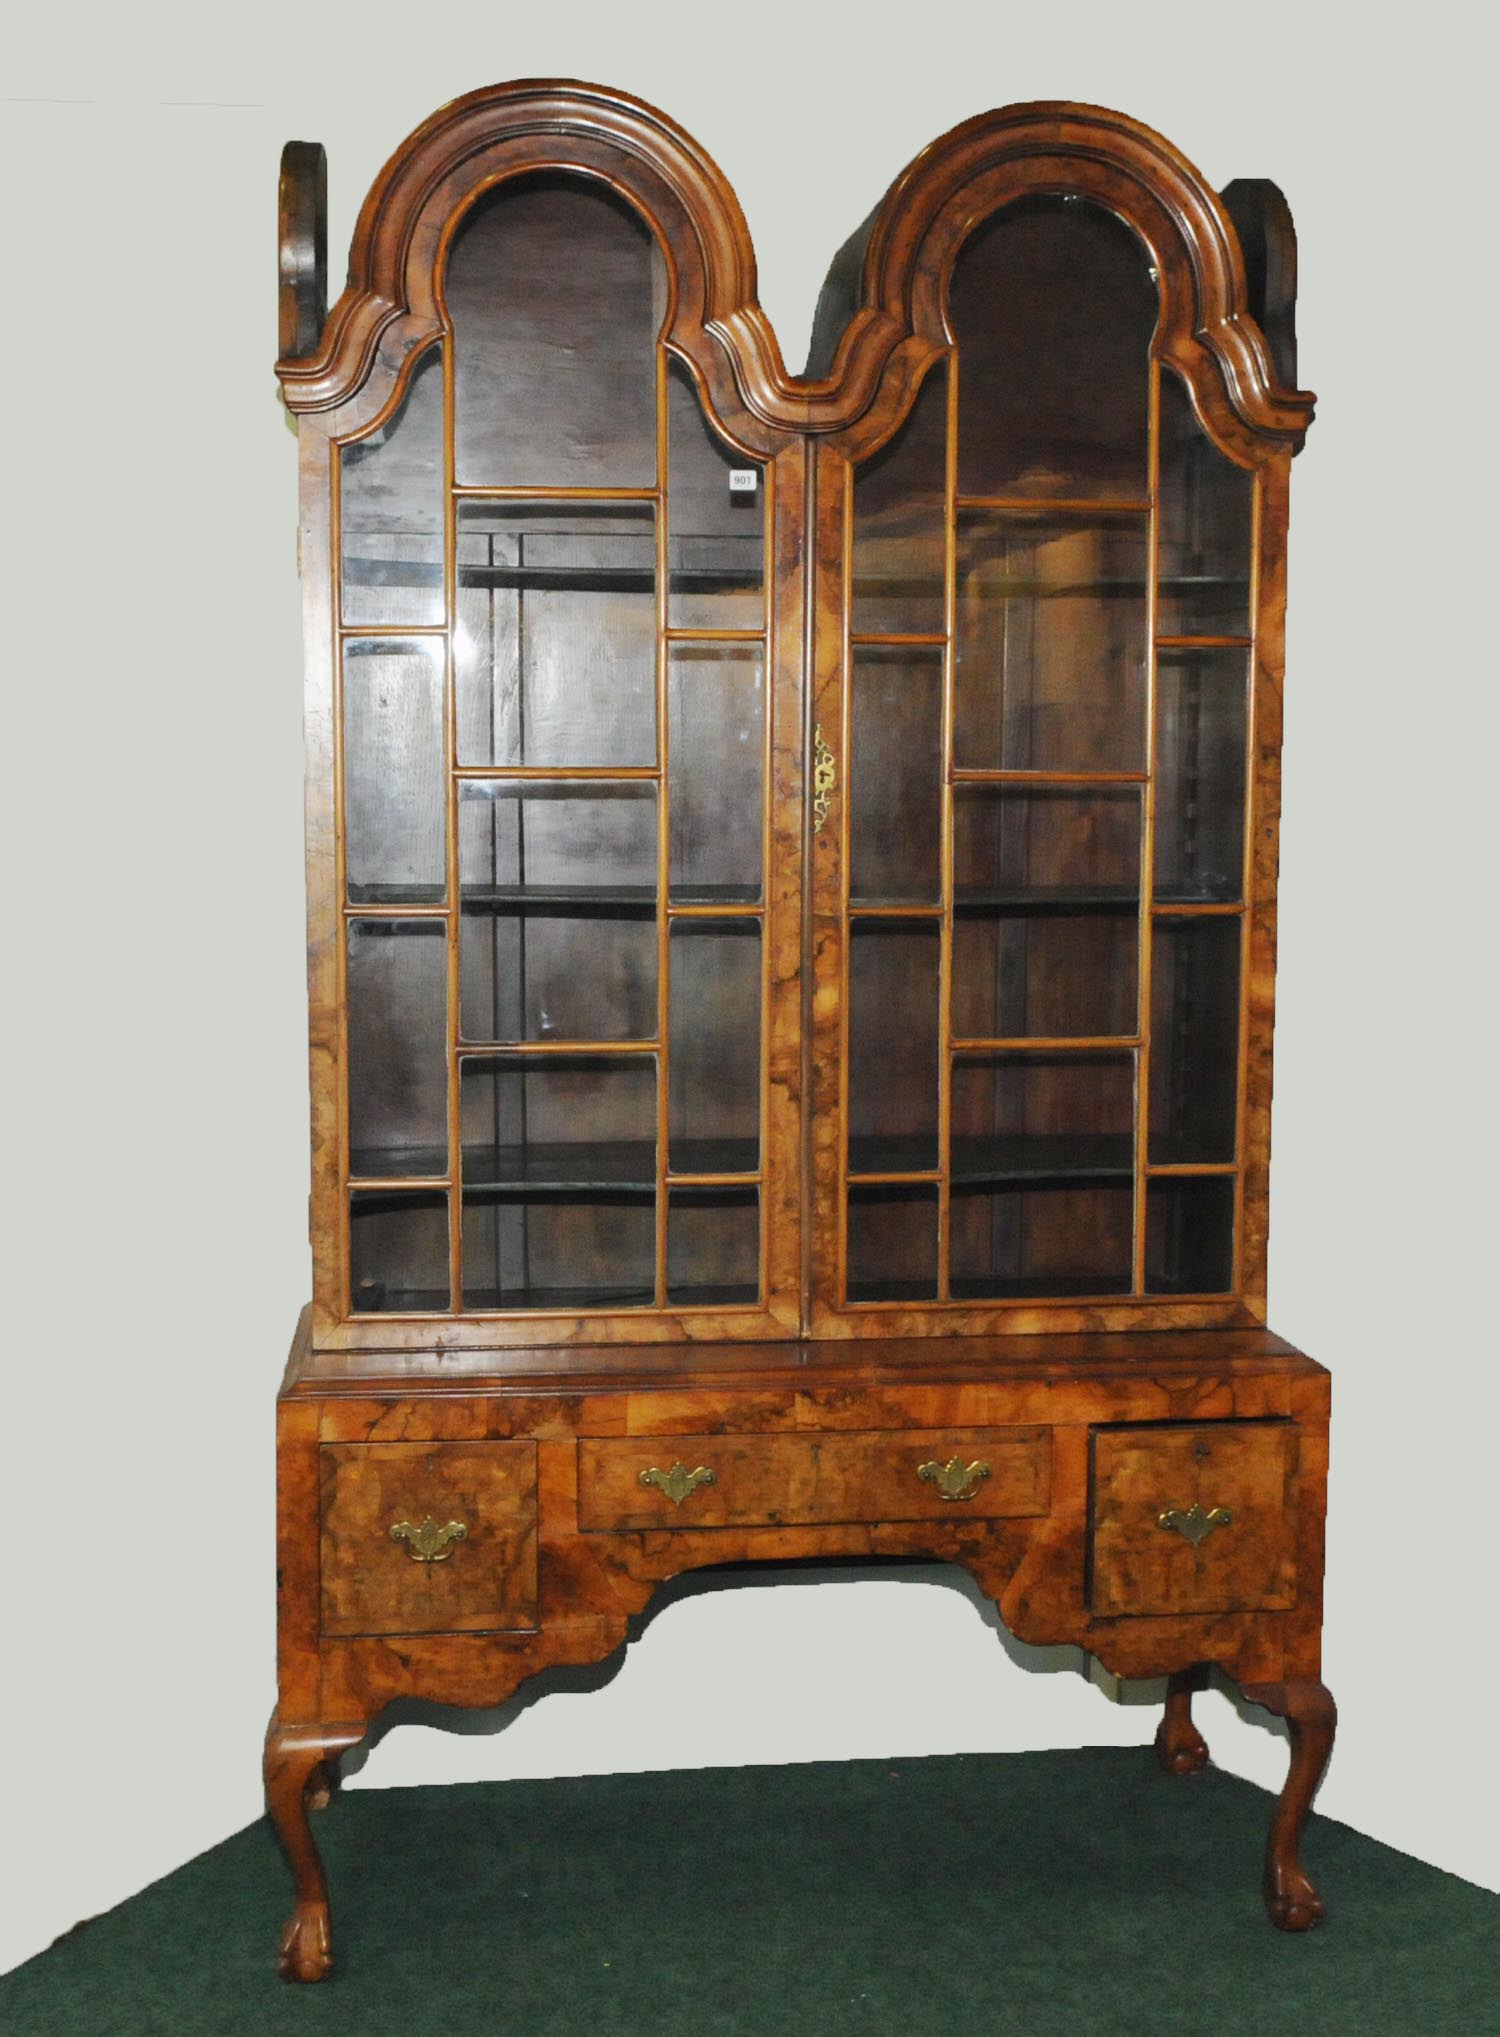 Late 19th century walnut cabinet in the Dutch style with lobed double scroll top above glazed